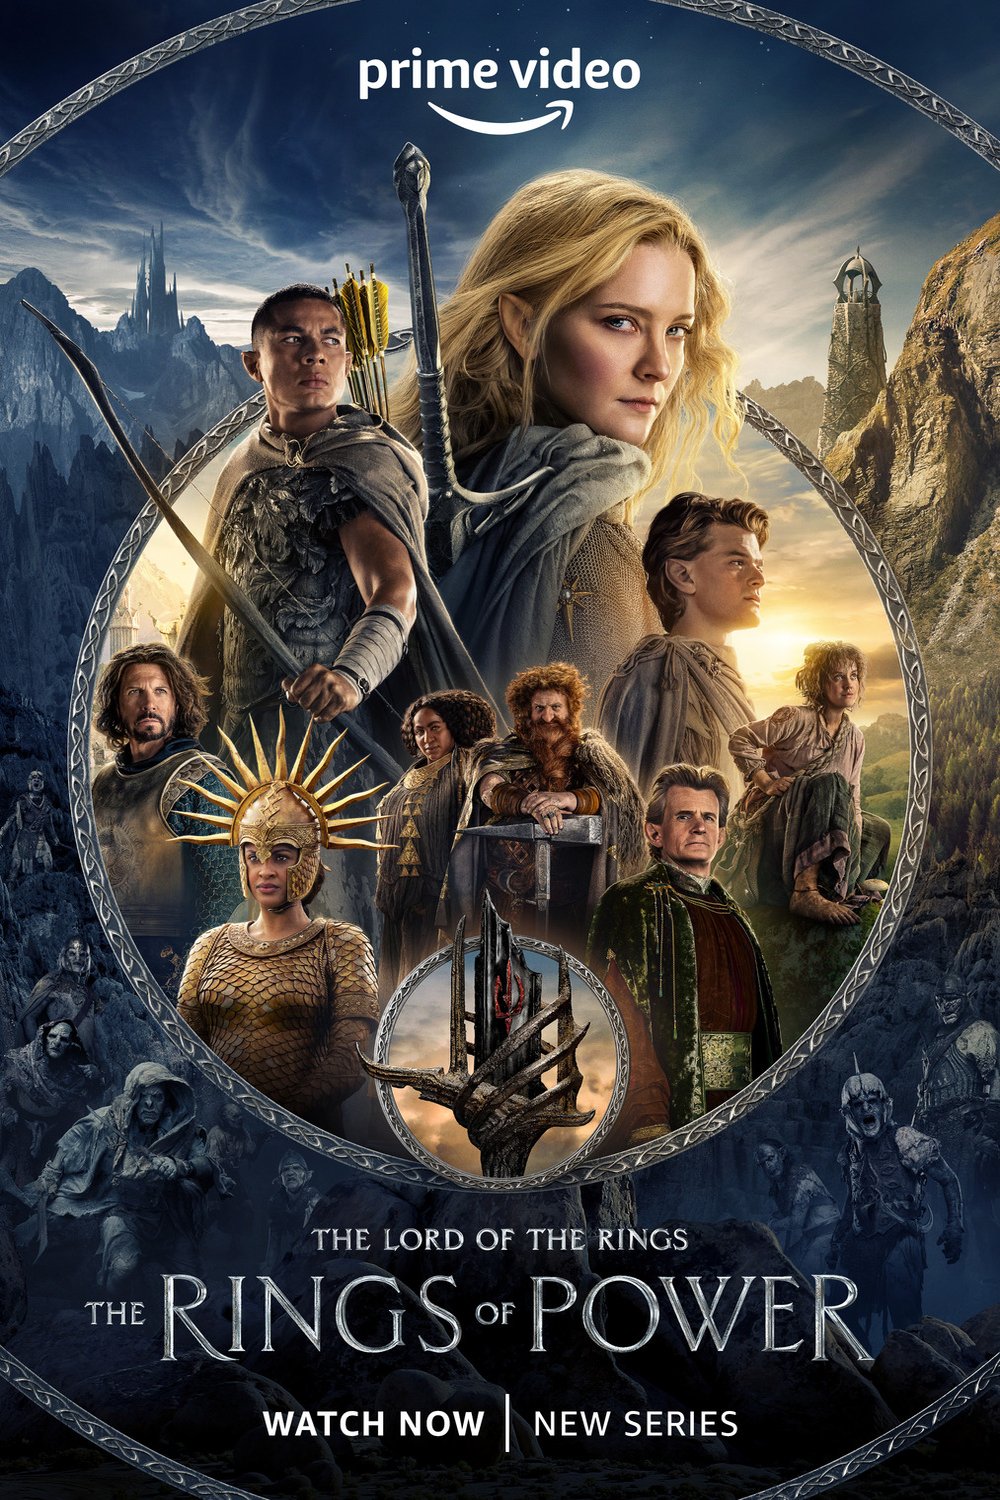 L'affiche du film The Lord of the Rings: The Rings of Power